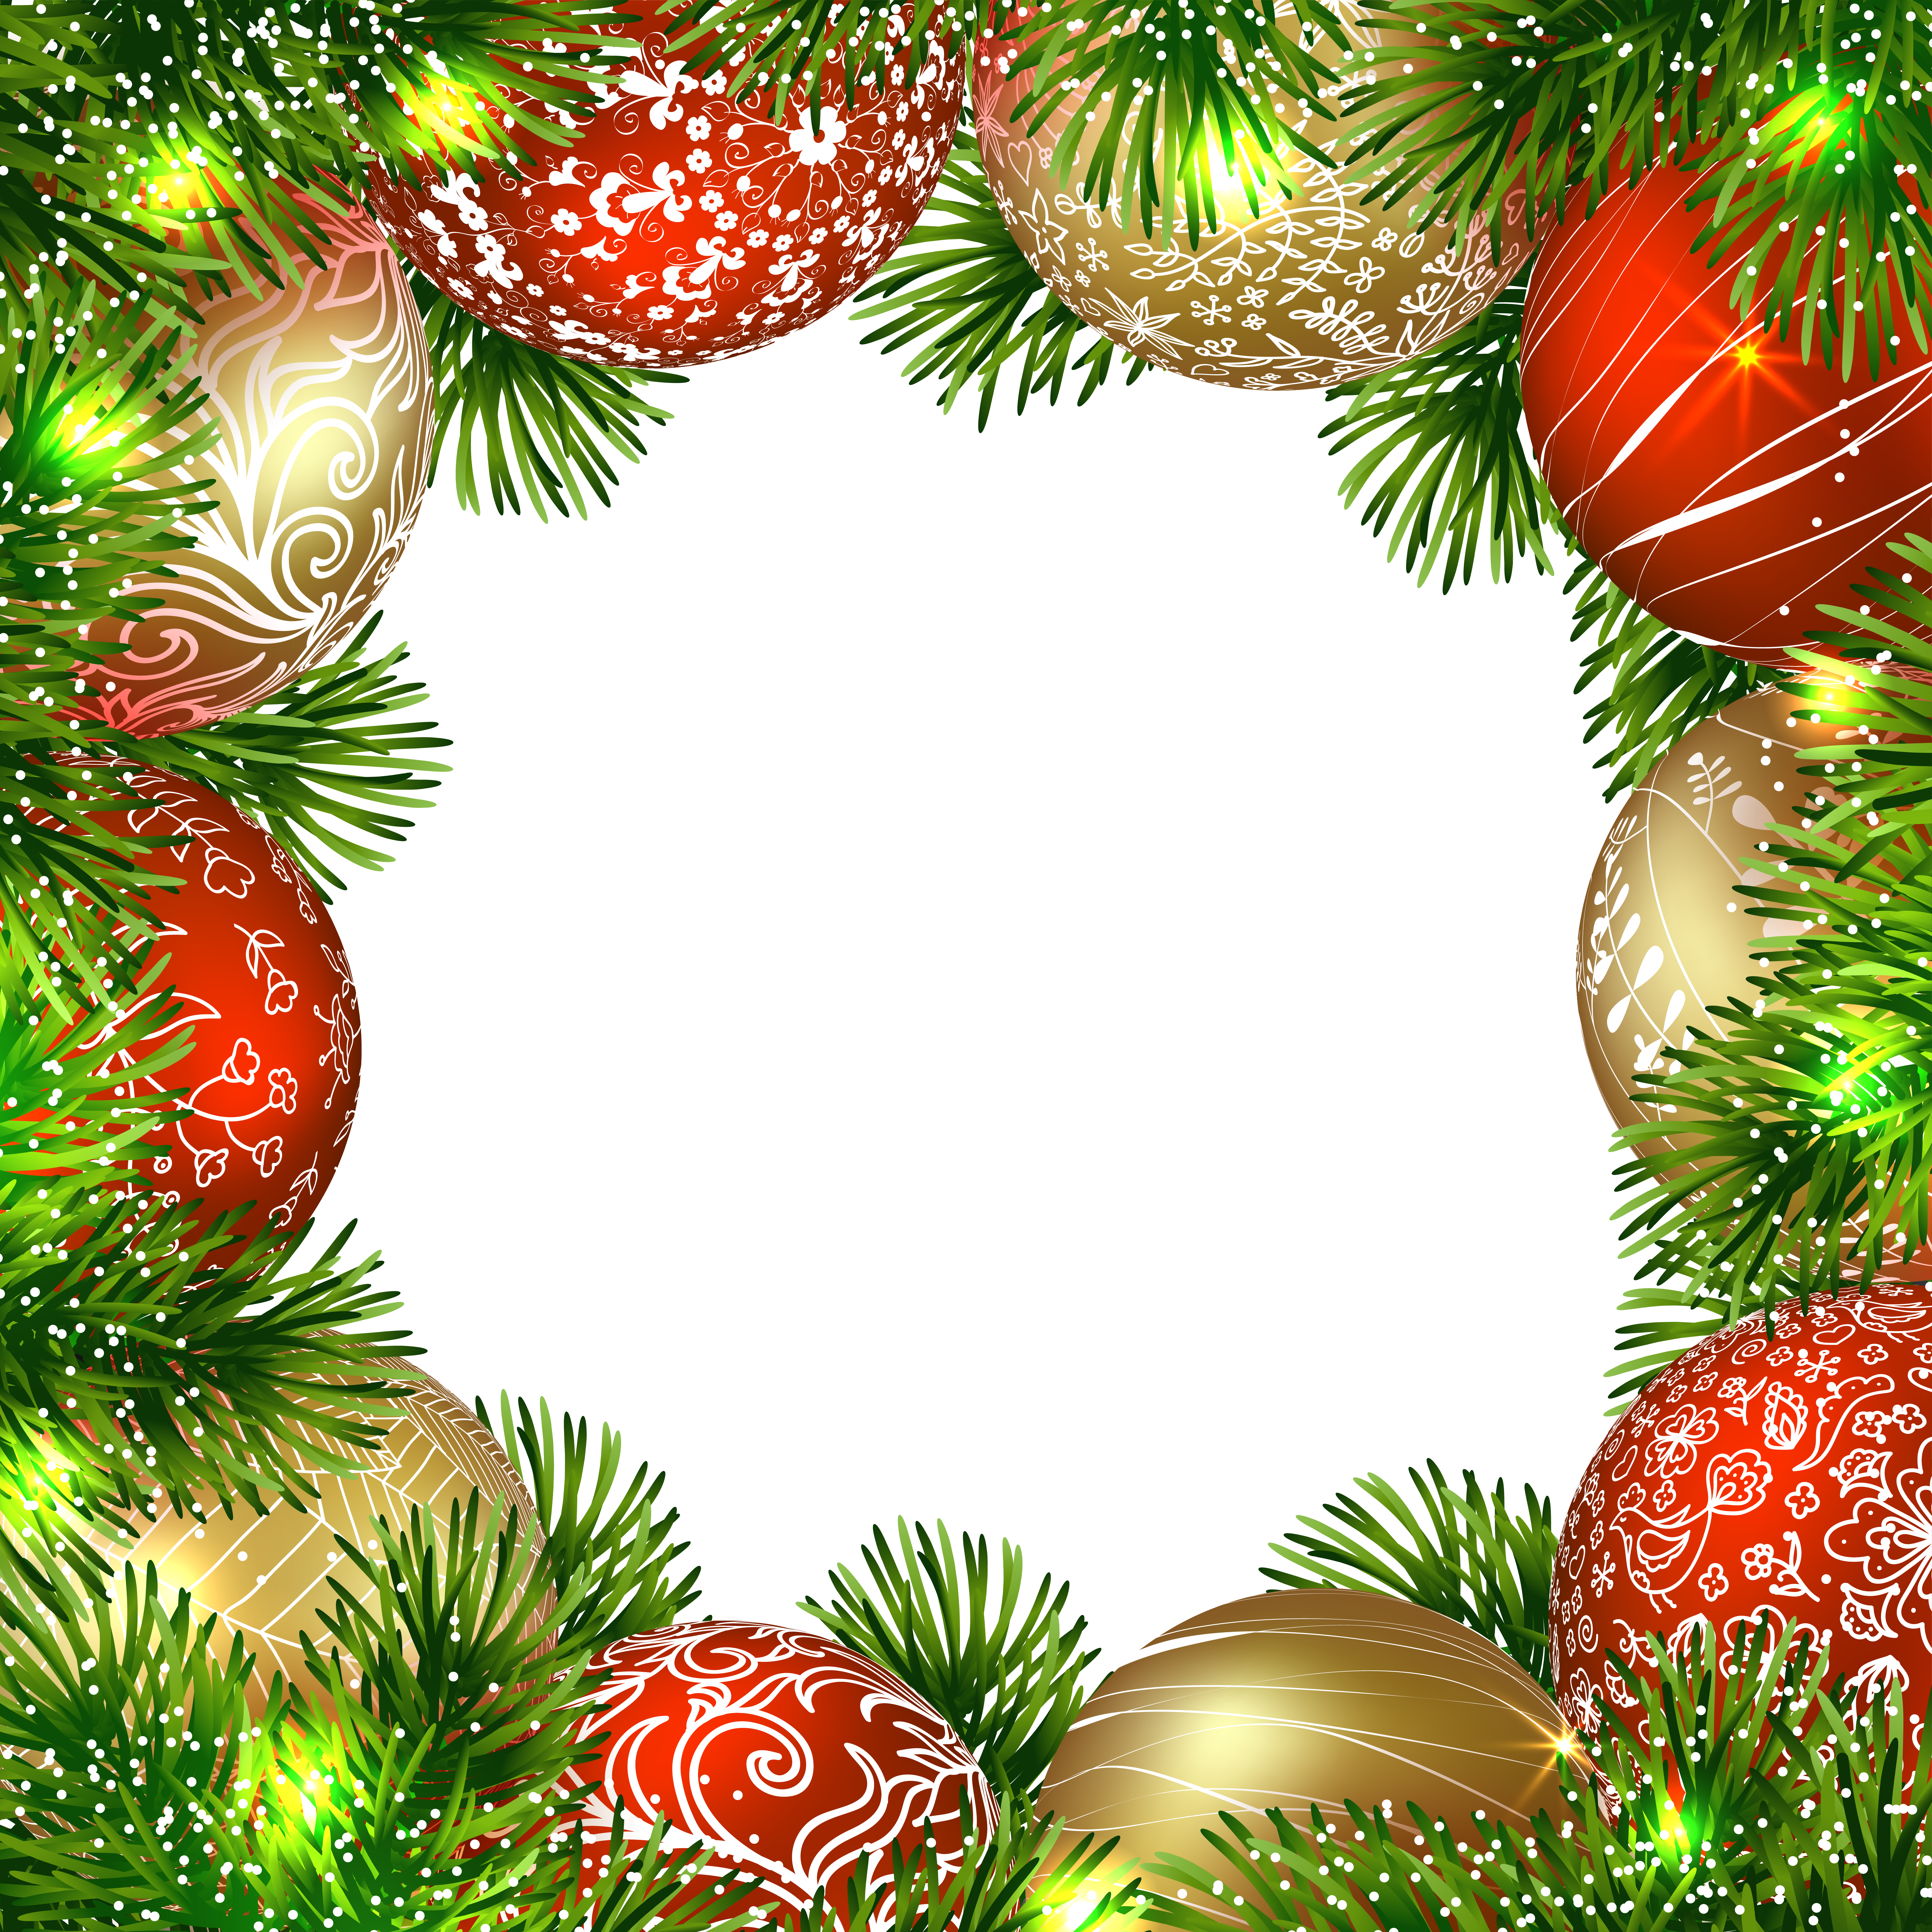 Transparent christmas border frame with ornaments gallery png